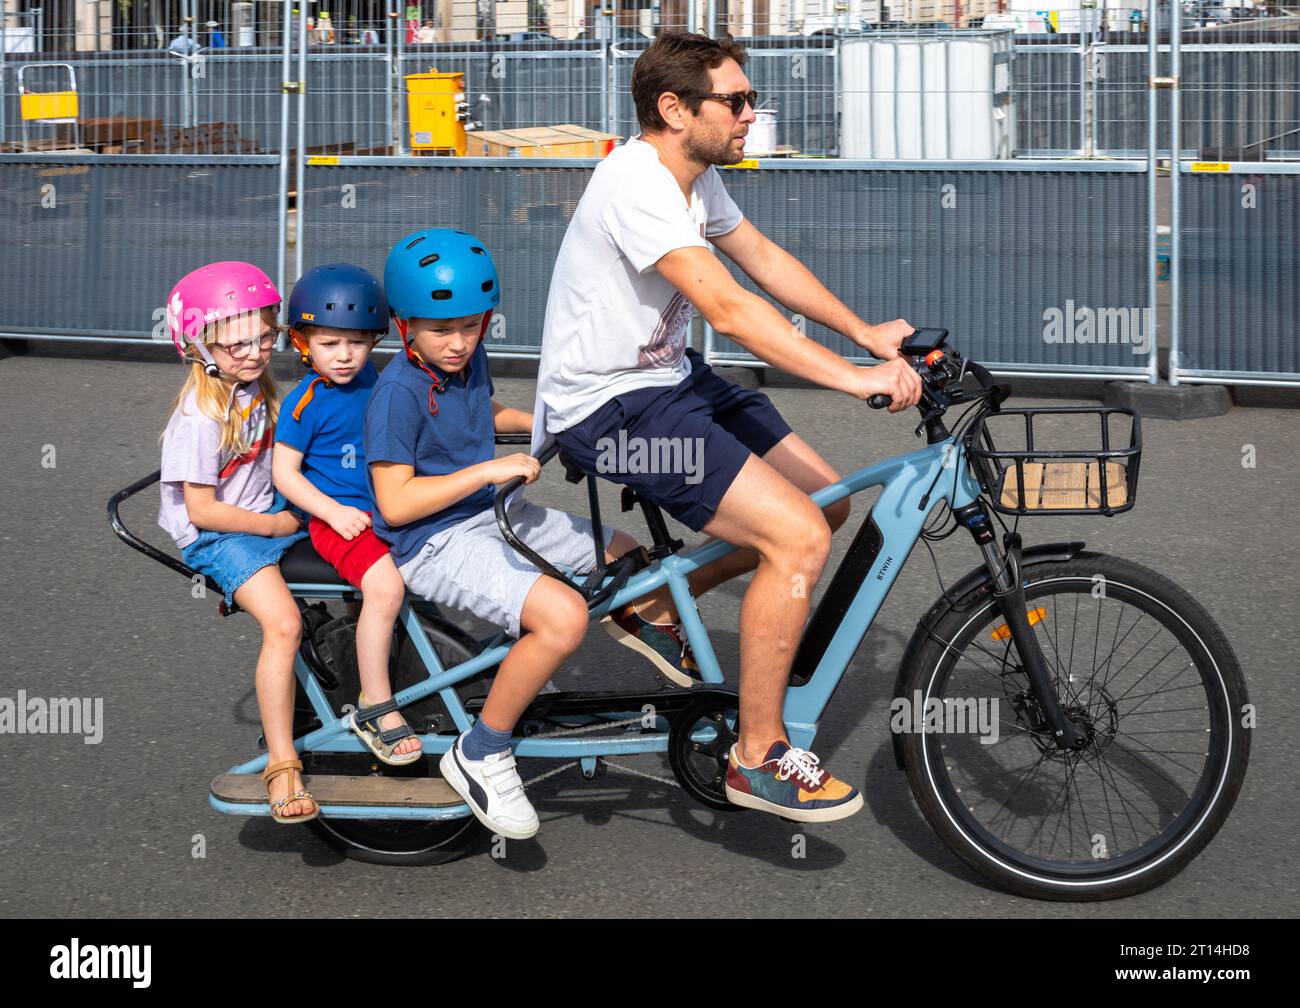 A father rides an electric bicycle carrying three young children on the rear in Paris, France. The bike is a Decathlon ELOPS BTWIN electric rear loadi Stock Photo